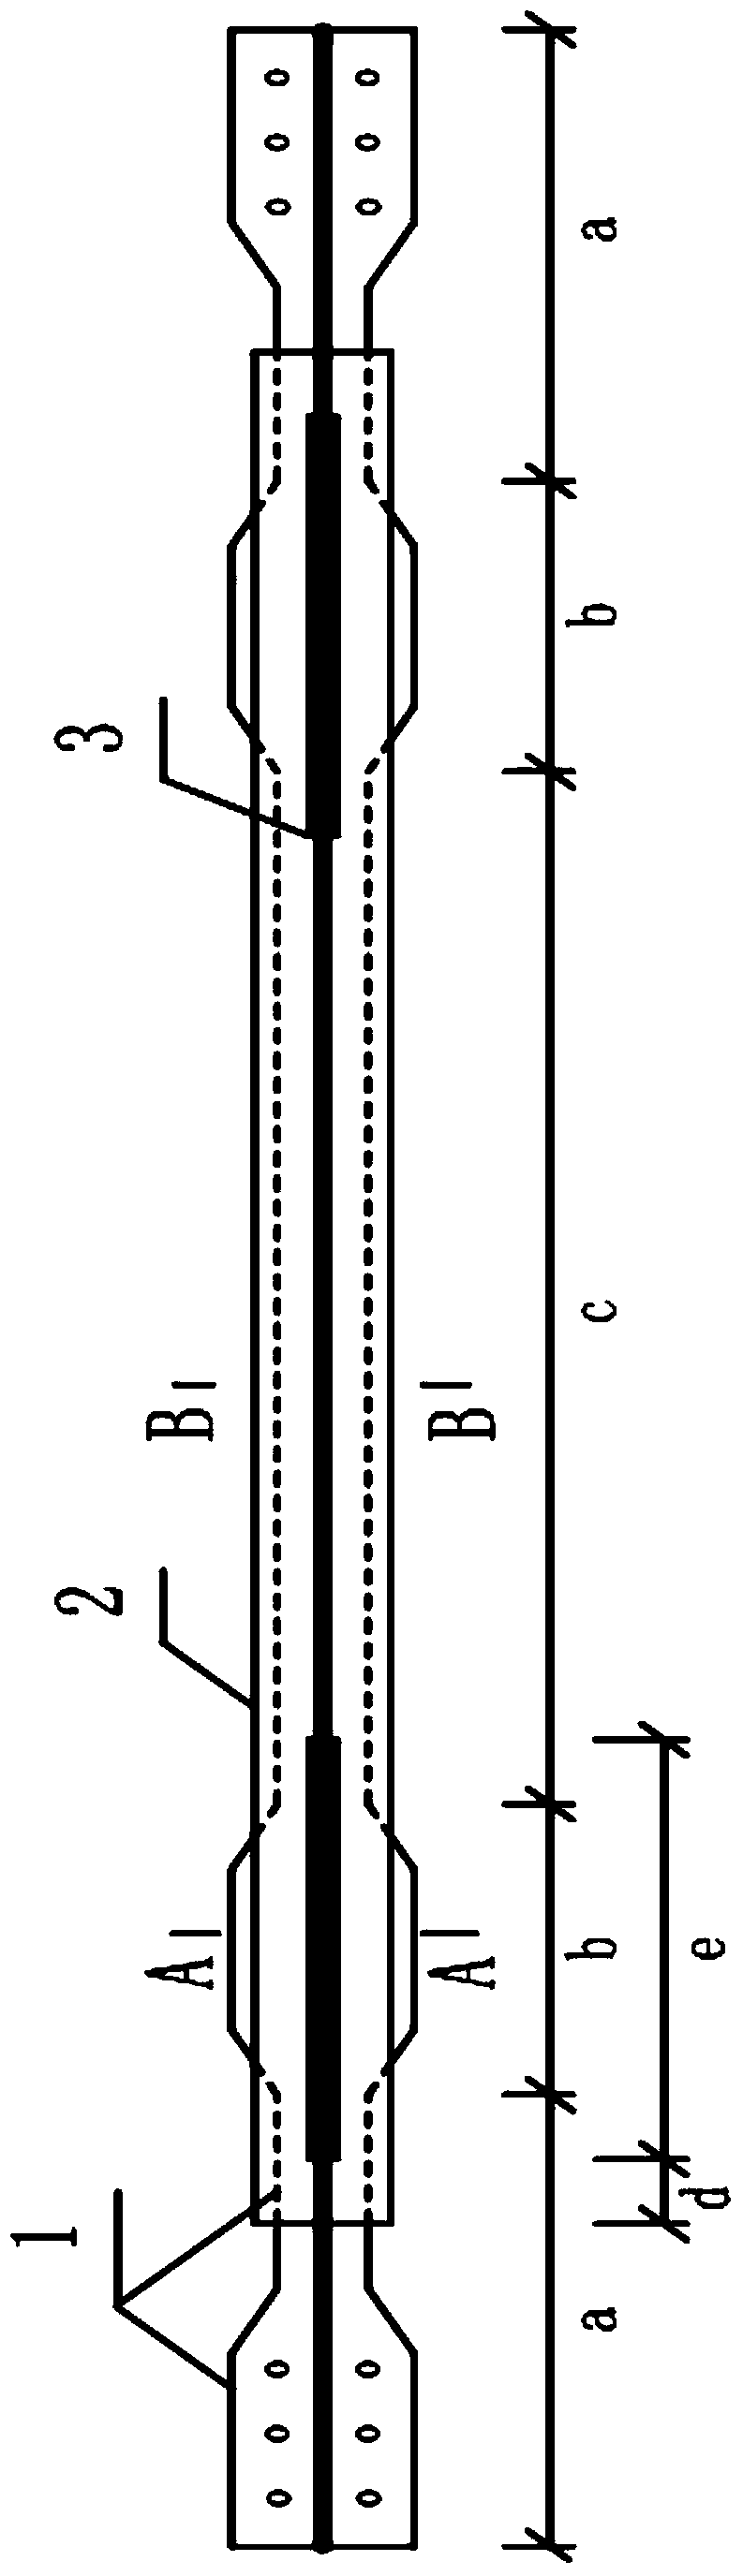 Rectangular steel tube variable-cross-section steel core anti-buckling limiting energy dissipation supporting member assembled with bolt shaped like Chinese character 'tian'